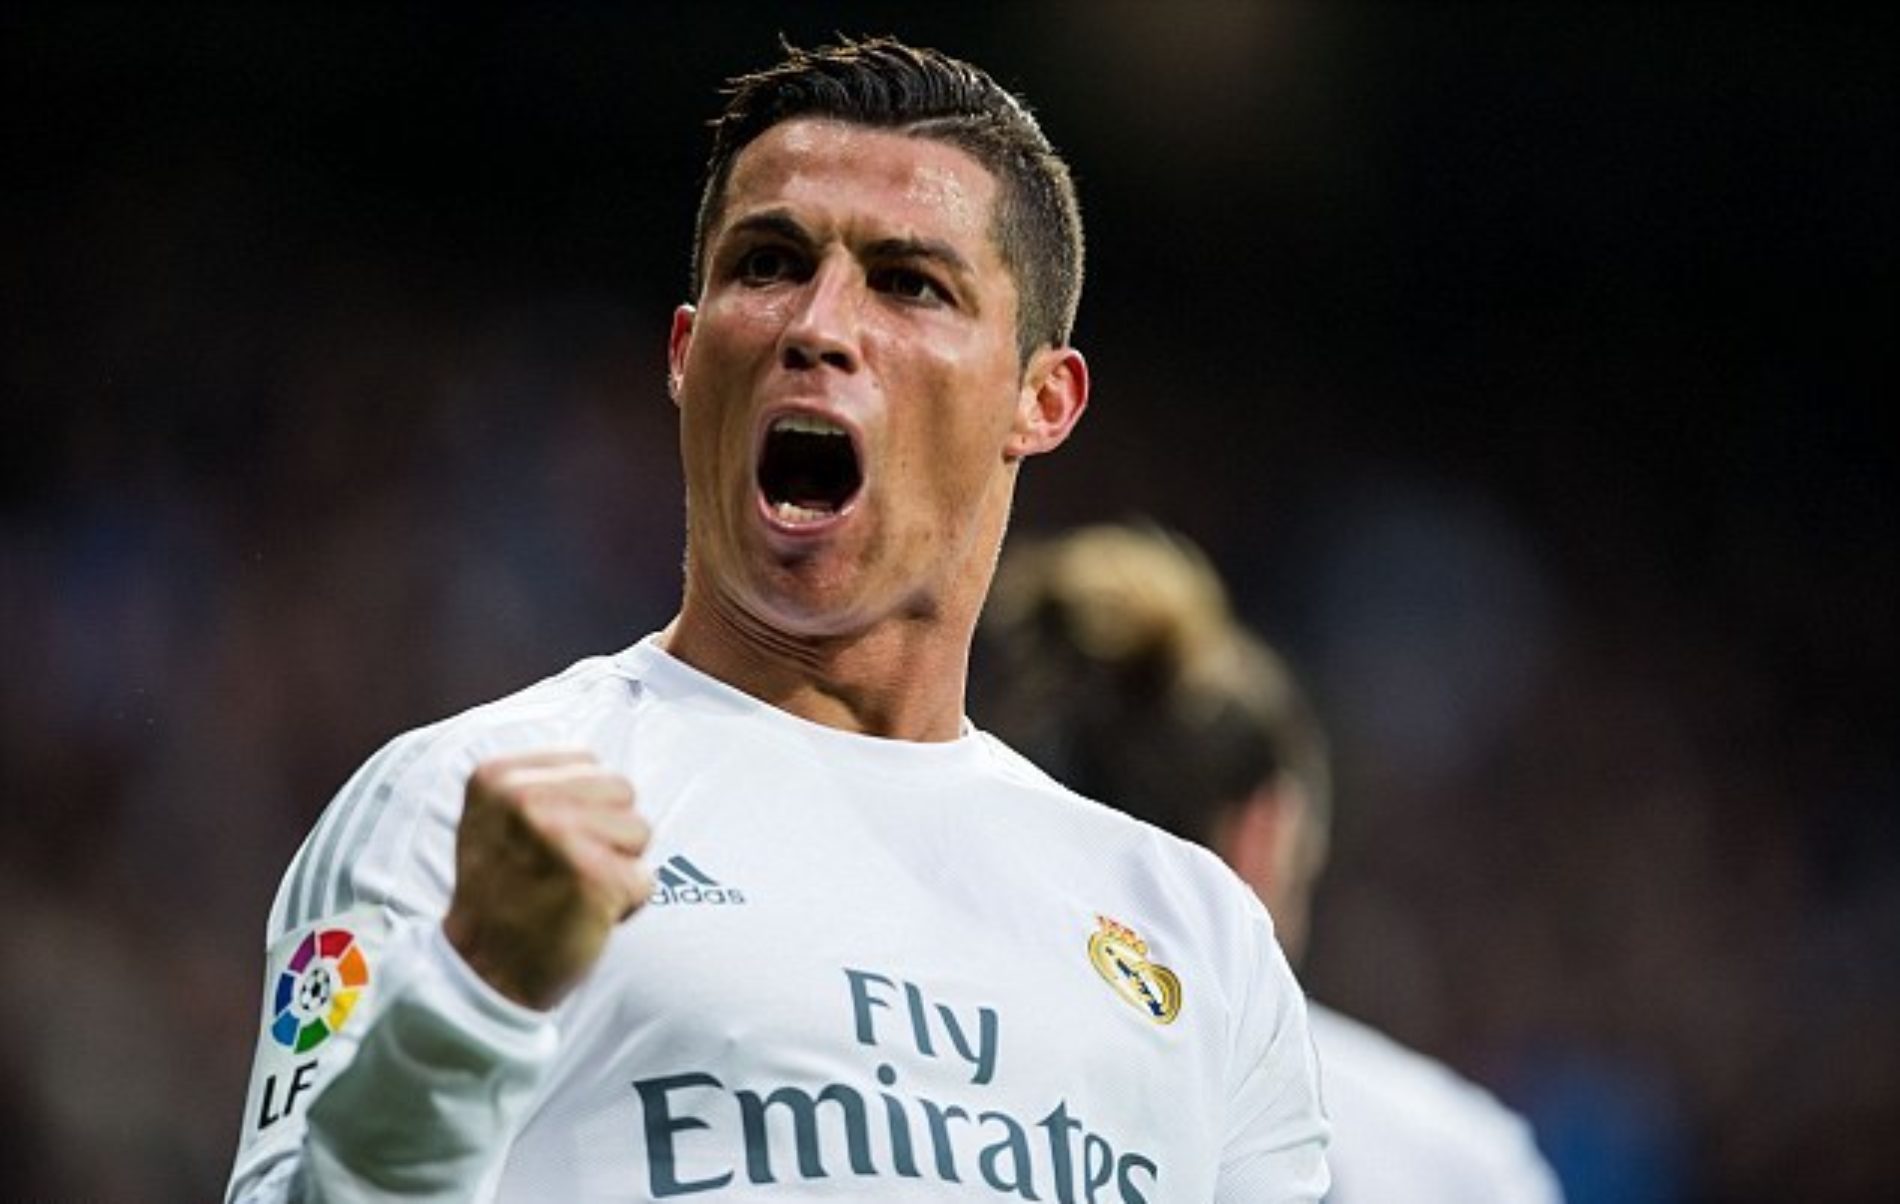 “A faggot with a lot of money!” Cristiano Ronaldo hits back at homophobic opponent